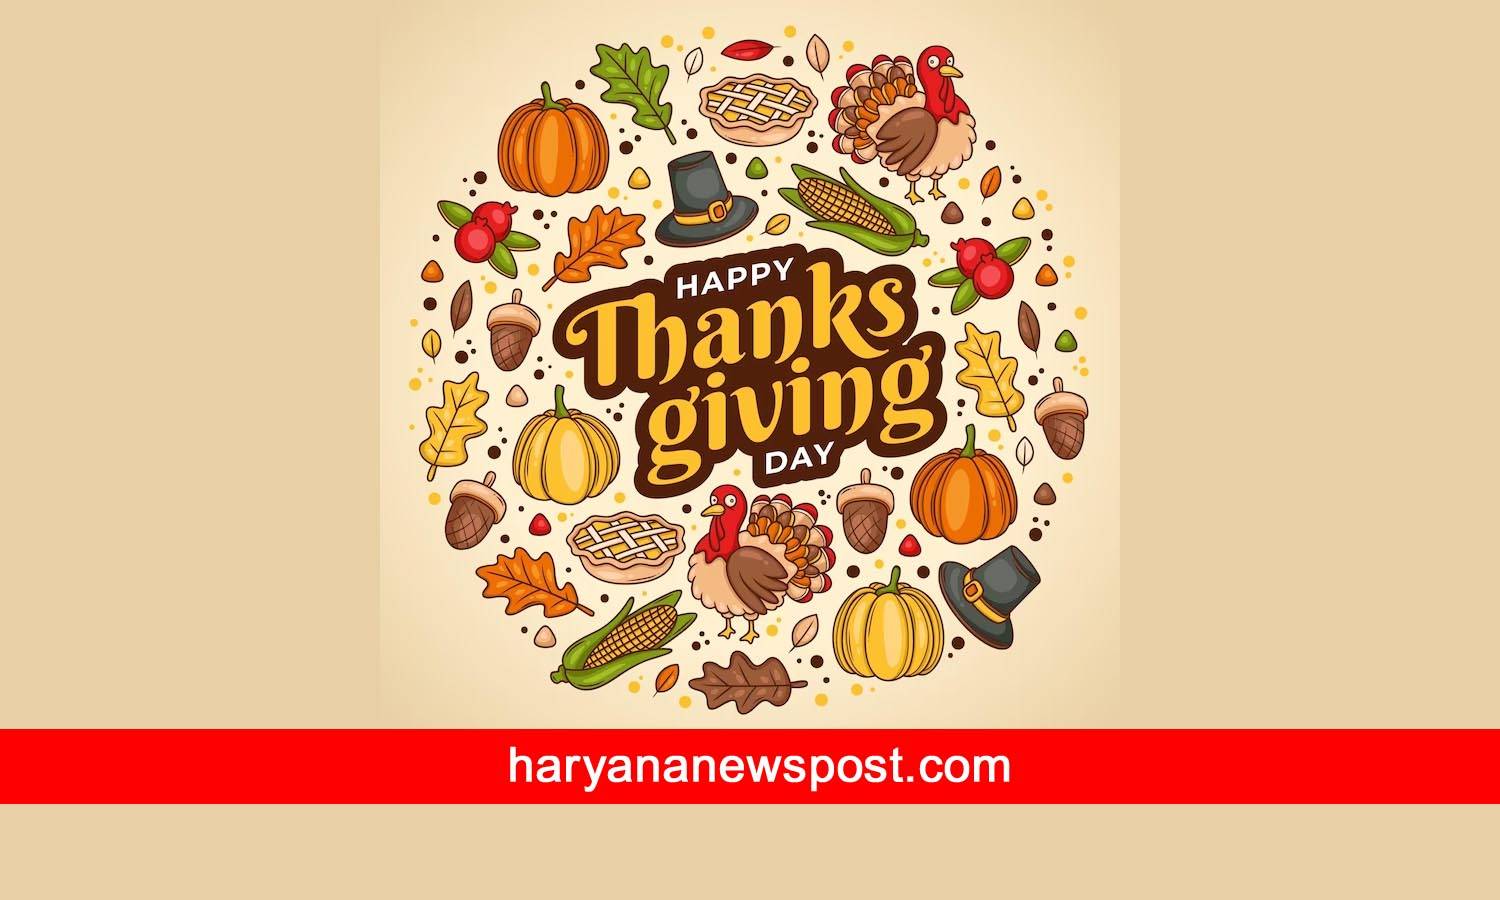 Religious Thanksgiving Messages – Christian Quotes, Wishes